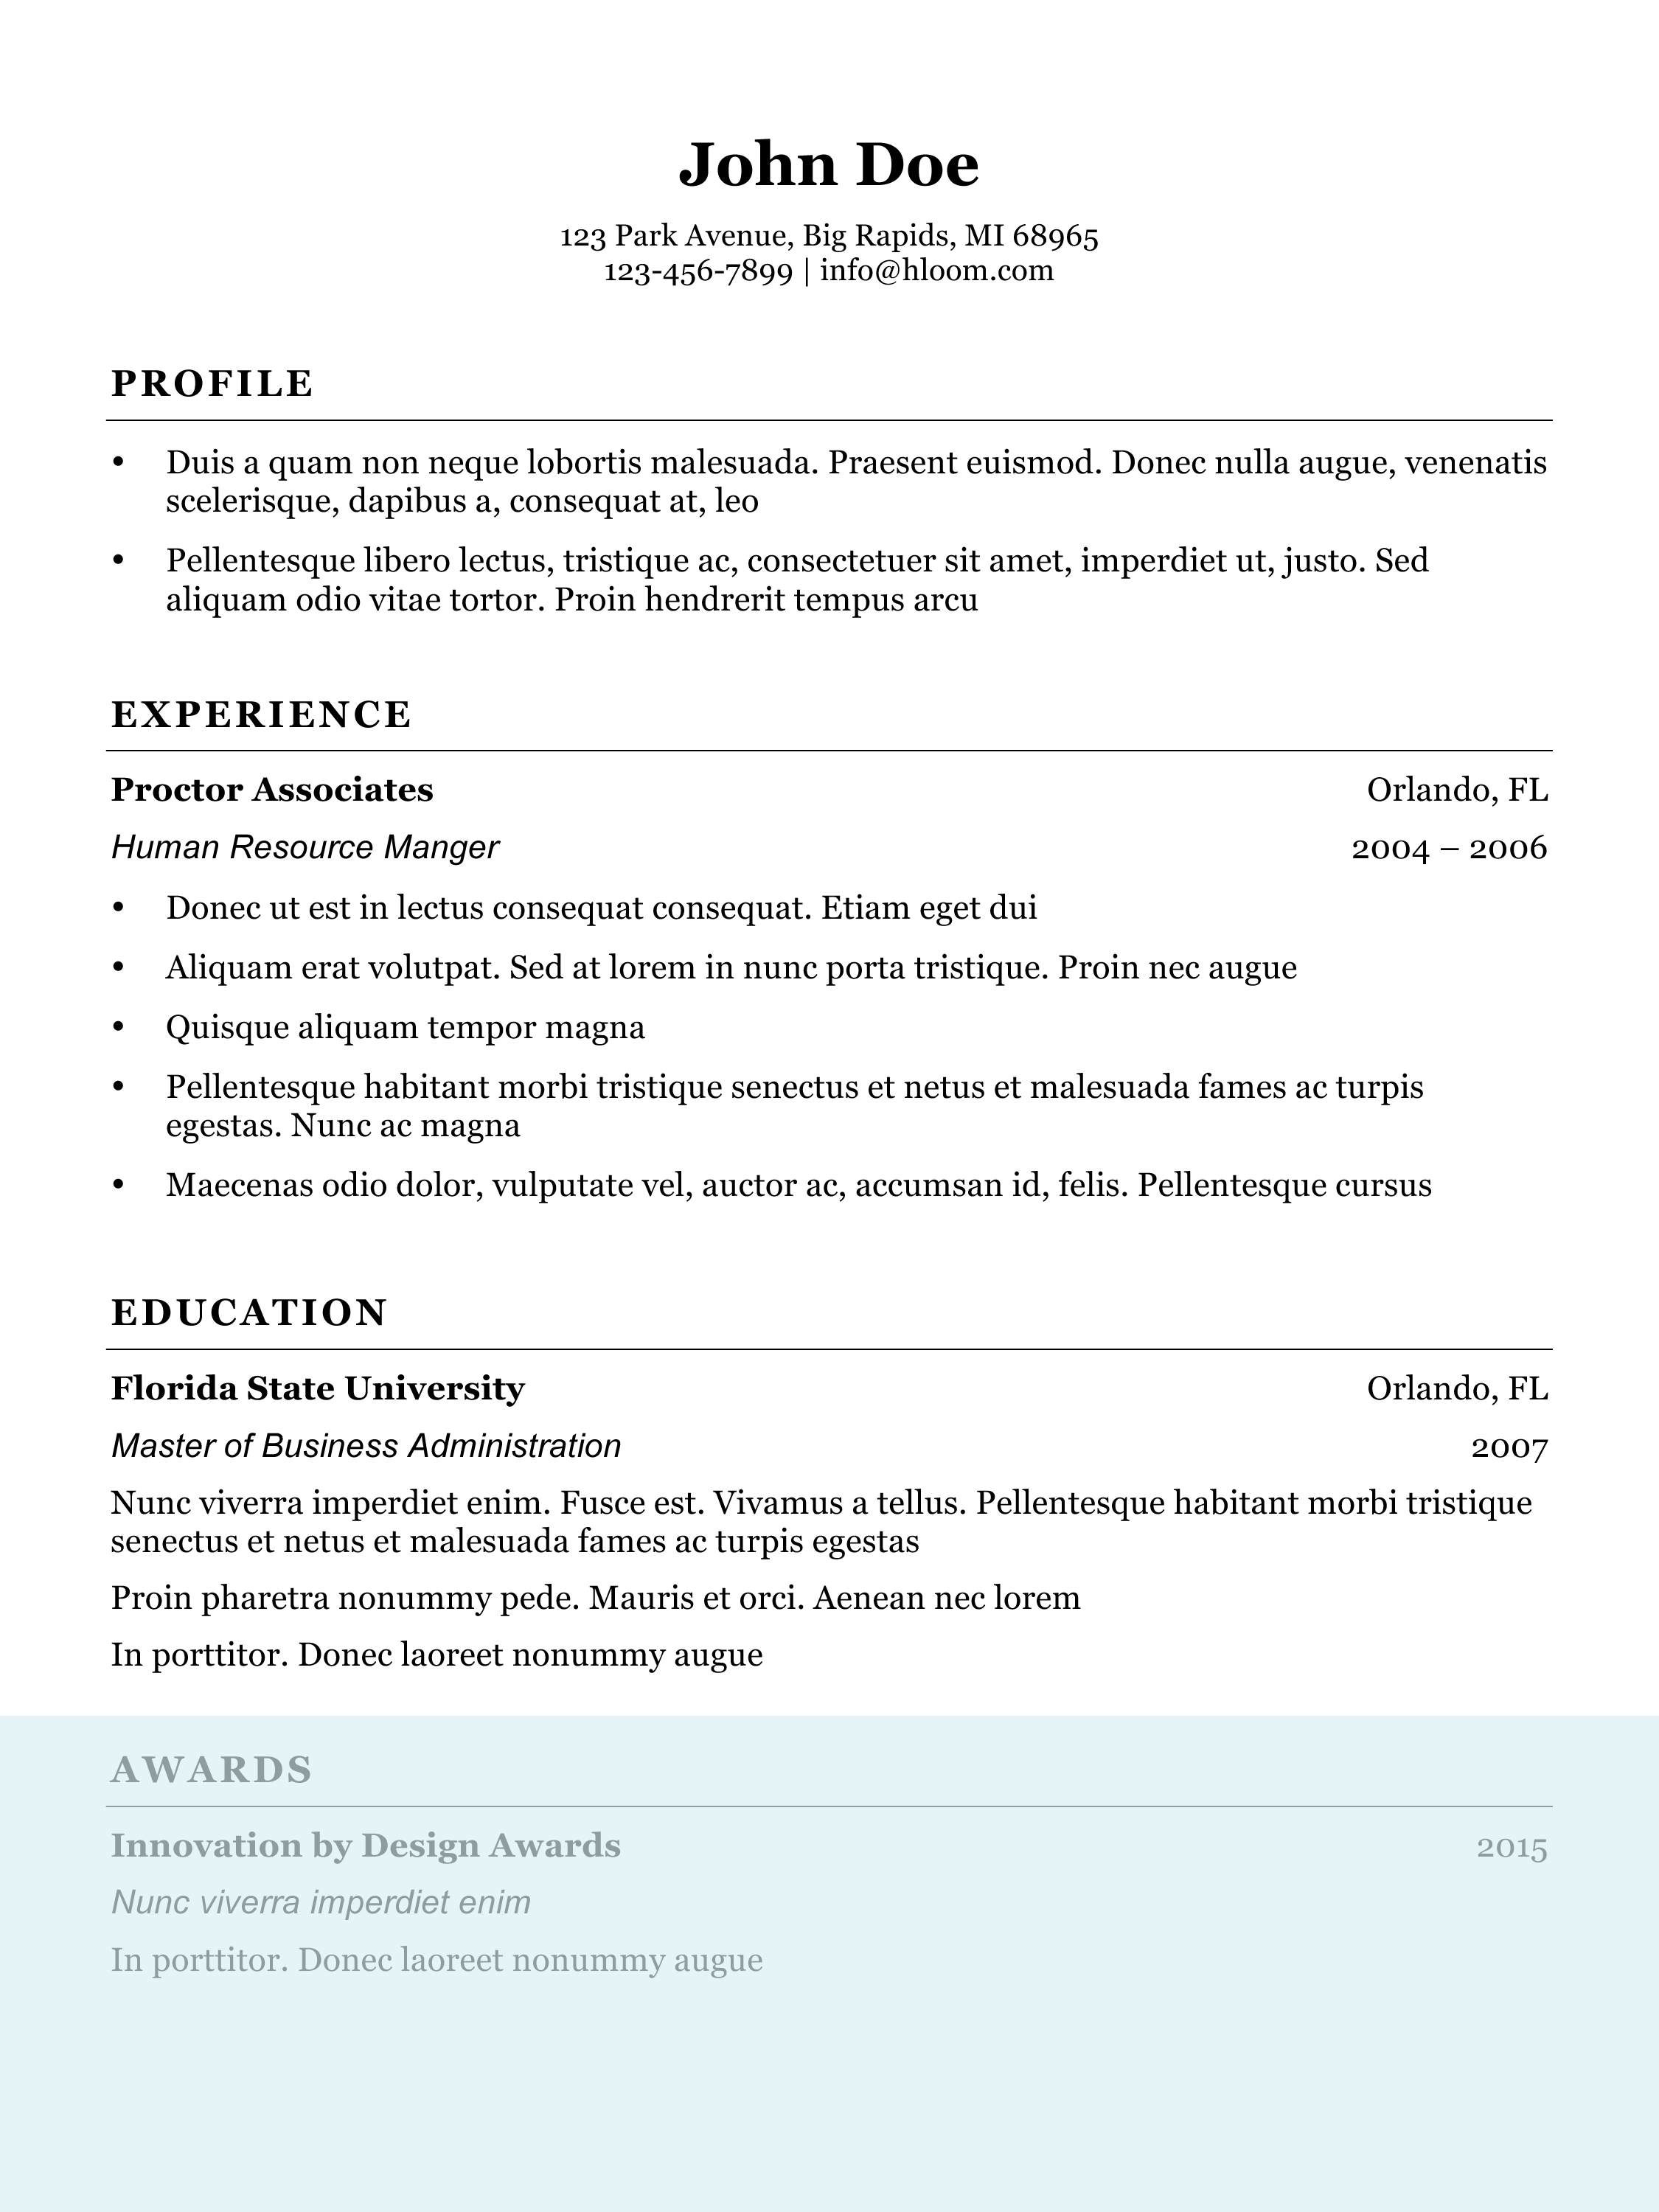 How to Write a Resume for a Job Make a Good Resume with Examples